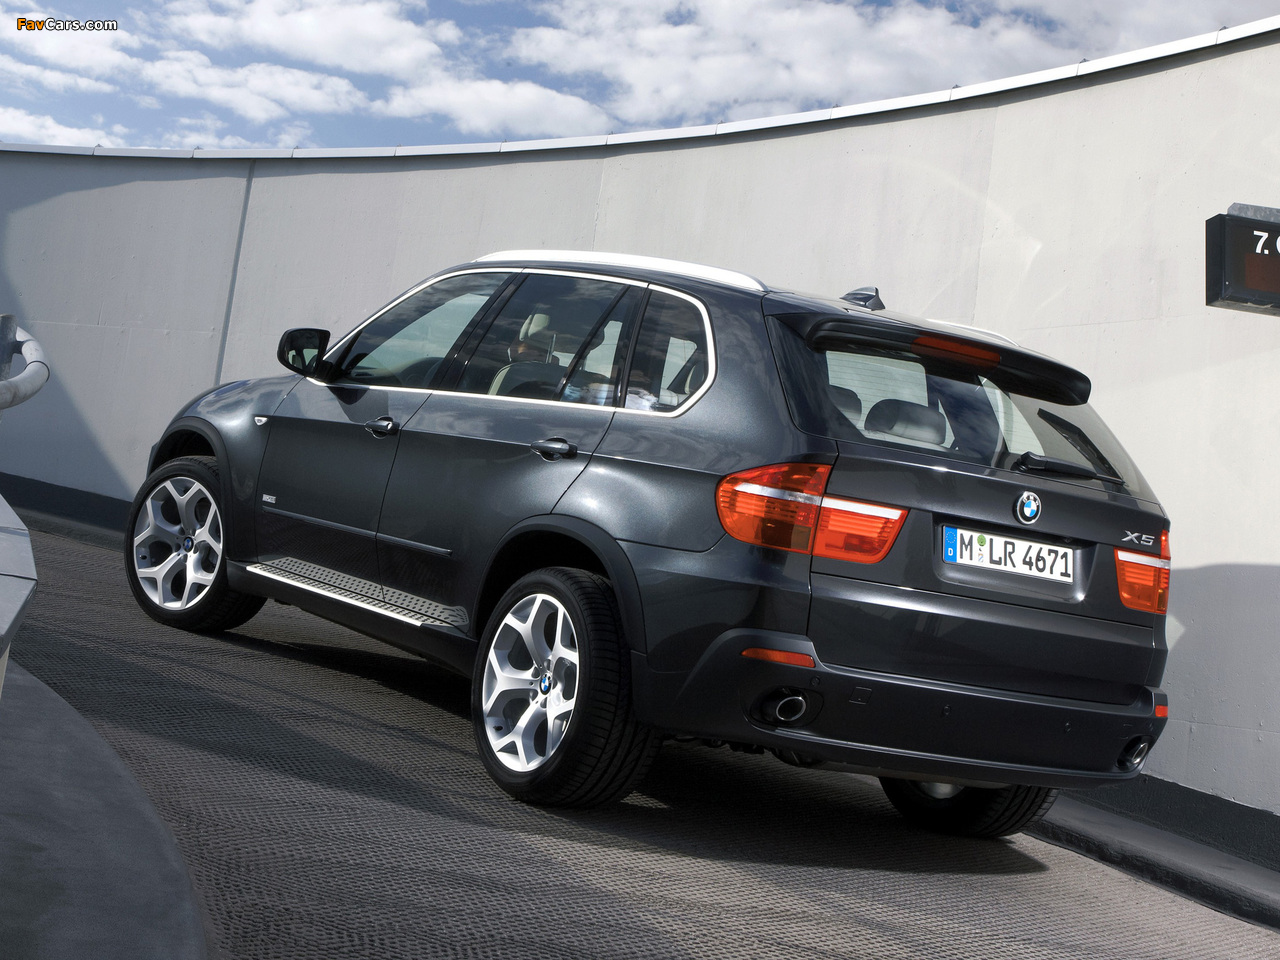 BMW X5 xDrive35d 10 Year Edition (E70) 2009 wallpapers (1280 x 960)